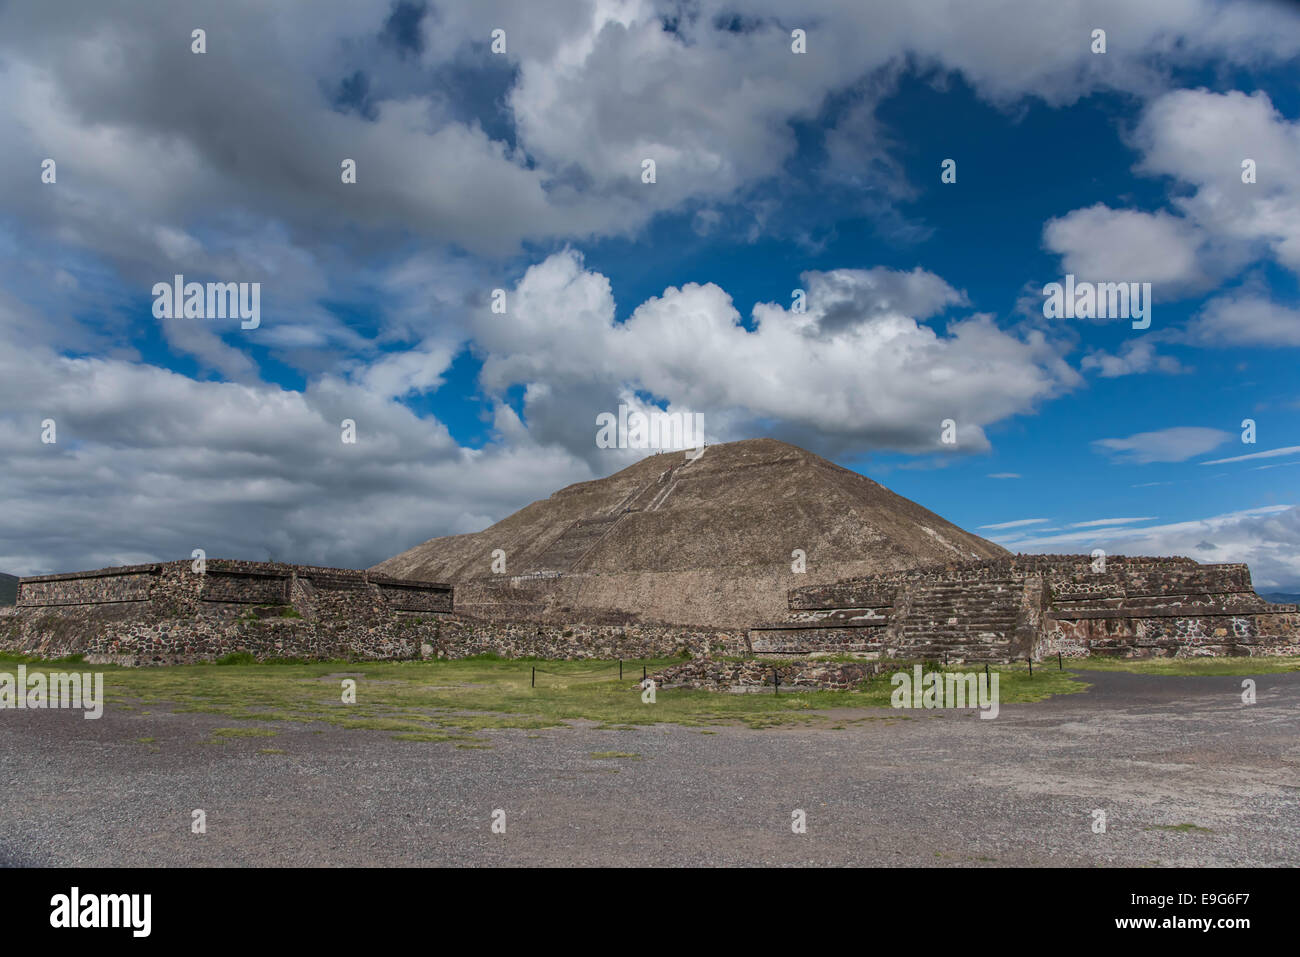 Pyramid of The Sun,Teotihuacan,Mexico Stock Photo